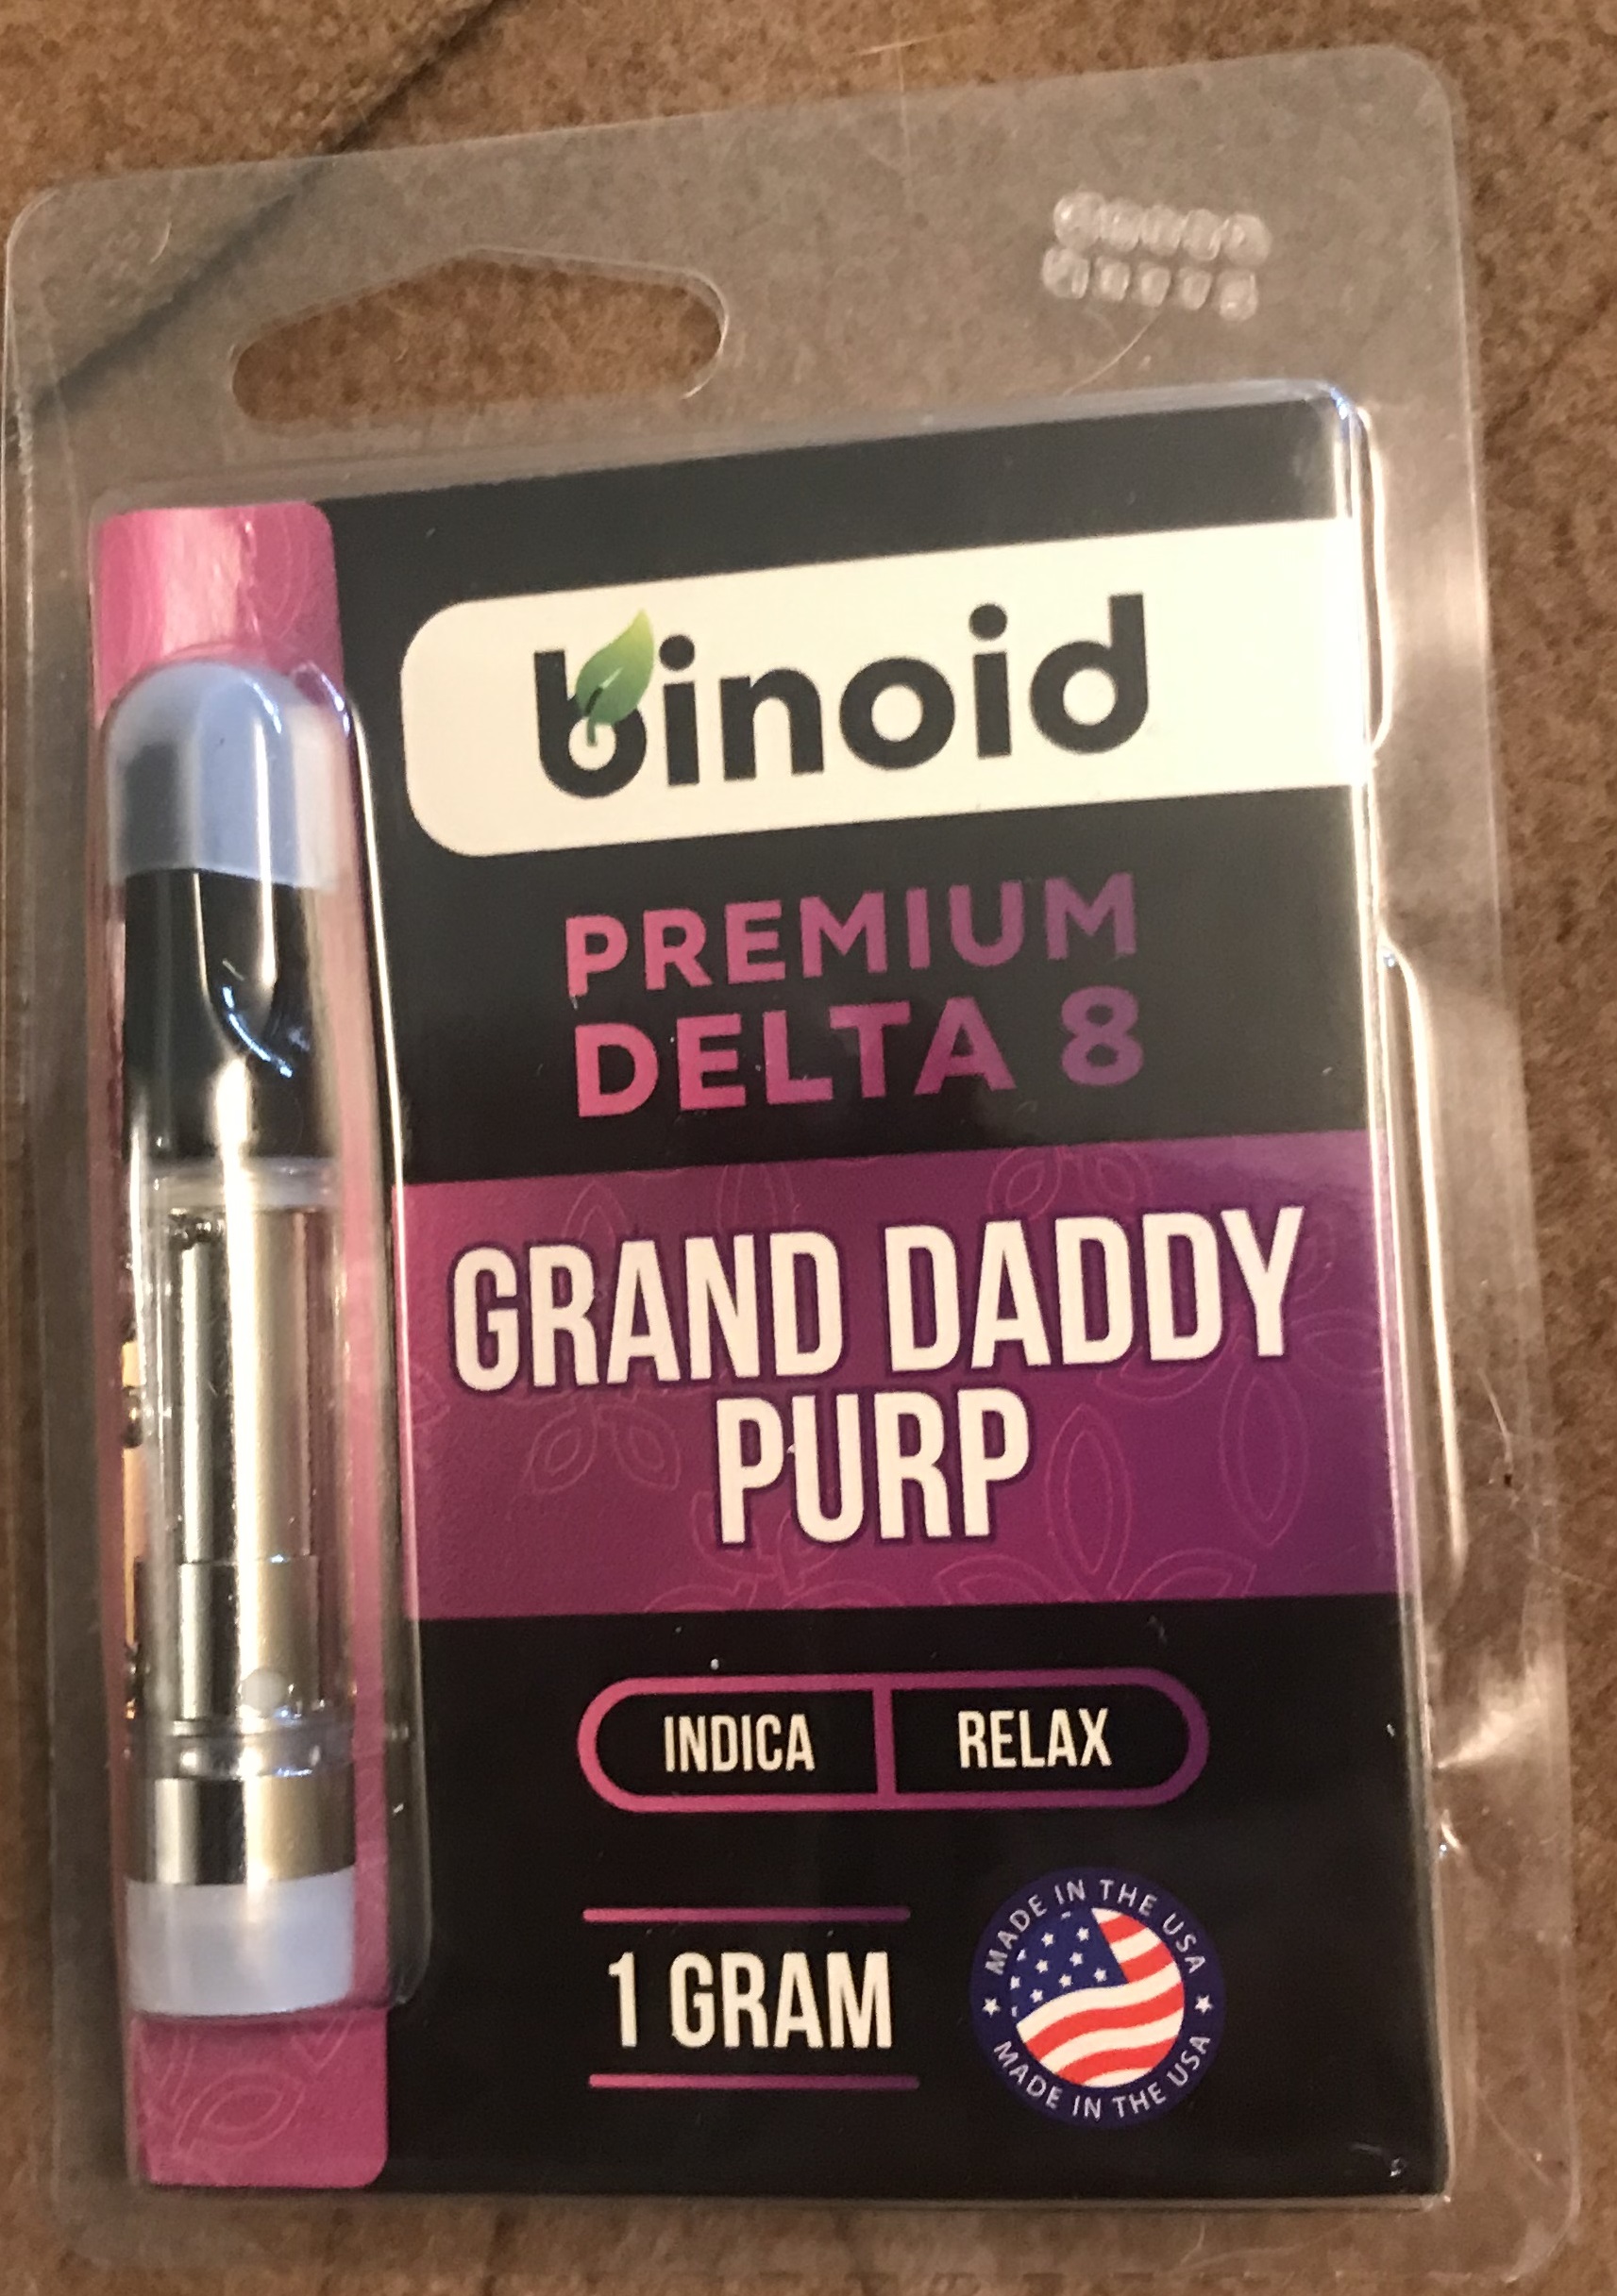 Delta 8 Distillate Reddit - Products|Thc|Hemp|Brand|Gummies|Product|Delta-8|Cbd|Origin|Cannabis|Delta|Users|Effects|Cartridges|Brands|Range|List|Research|Usasource|Options|Benefits|Plant|Companies|Vape|Source|Results|Gummy|People|Space|High-Quality|Quality|Place|Overview|Flowers|Lab|Drug|Cannabinoids|Tinctures|Overviewproducts|Cartridge|Delta-8 Thc|Delta-8 Products|Delta-9 Thc|Delta-8 Brands|Usa Source|Delta-8 Thc Products|Cannabis Plant|Federal Level|United States|Delta-8 Gummies|Delta-8 Space|Health Canada|Delta Products|Delta-8 Thc Gummies|Delta-8 Companies|Vape Cartridges|Similar Benefits|Hemp Doctor|Brand Overviewproducts|Drug Test|High-Quality Products|Organic Hemp|San Jose|Editorial Team|Farm Bill|Overview Products|Wide Range|Psychoactive Properties|Reliable Provider|Boston Hempire